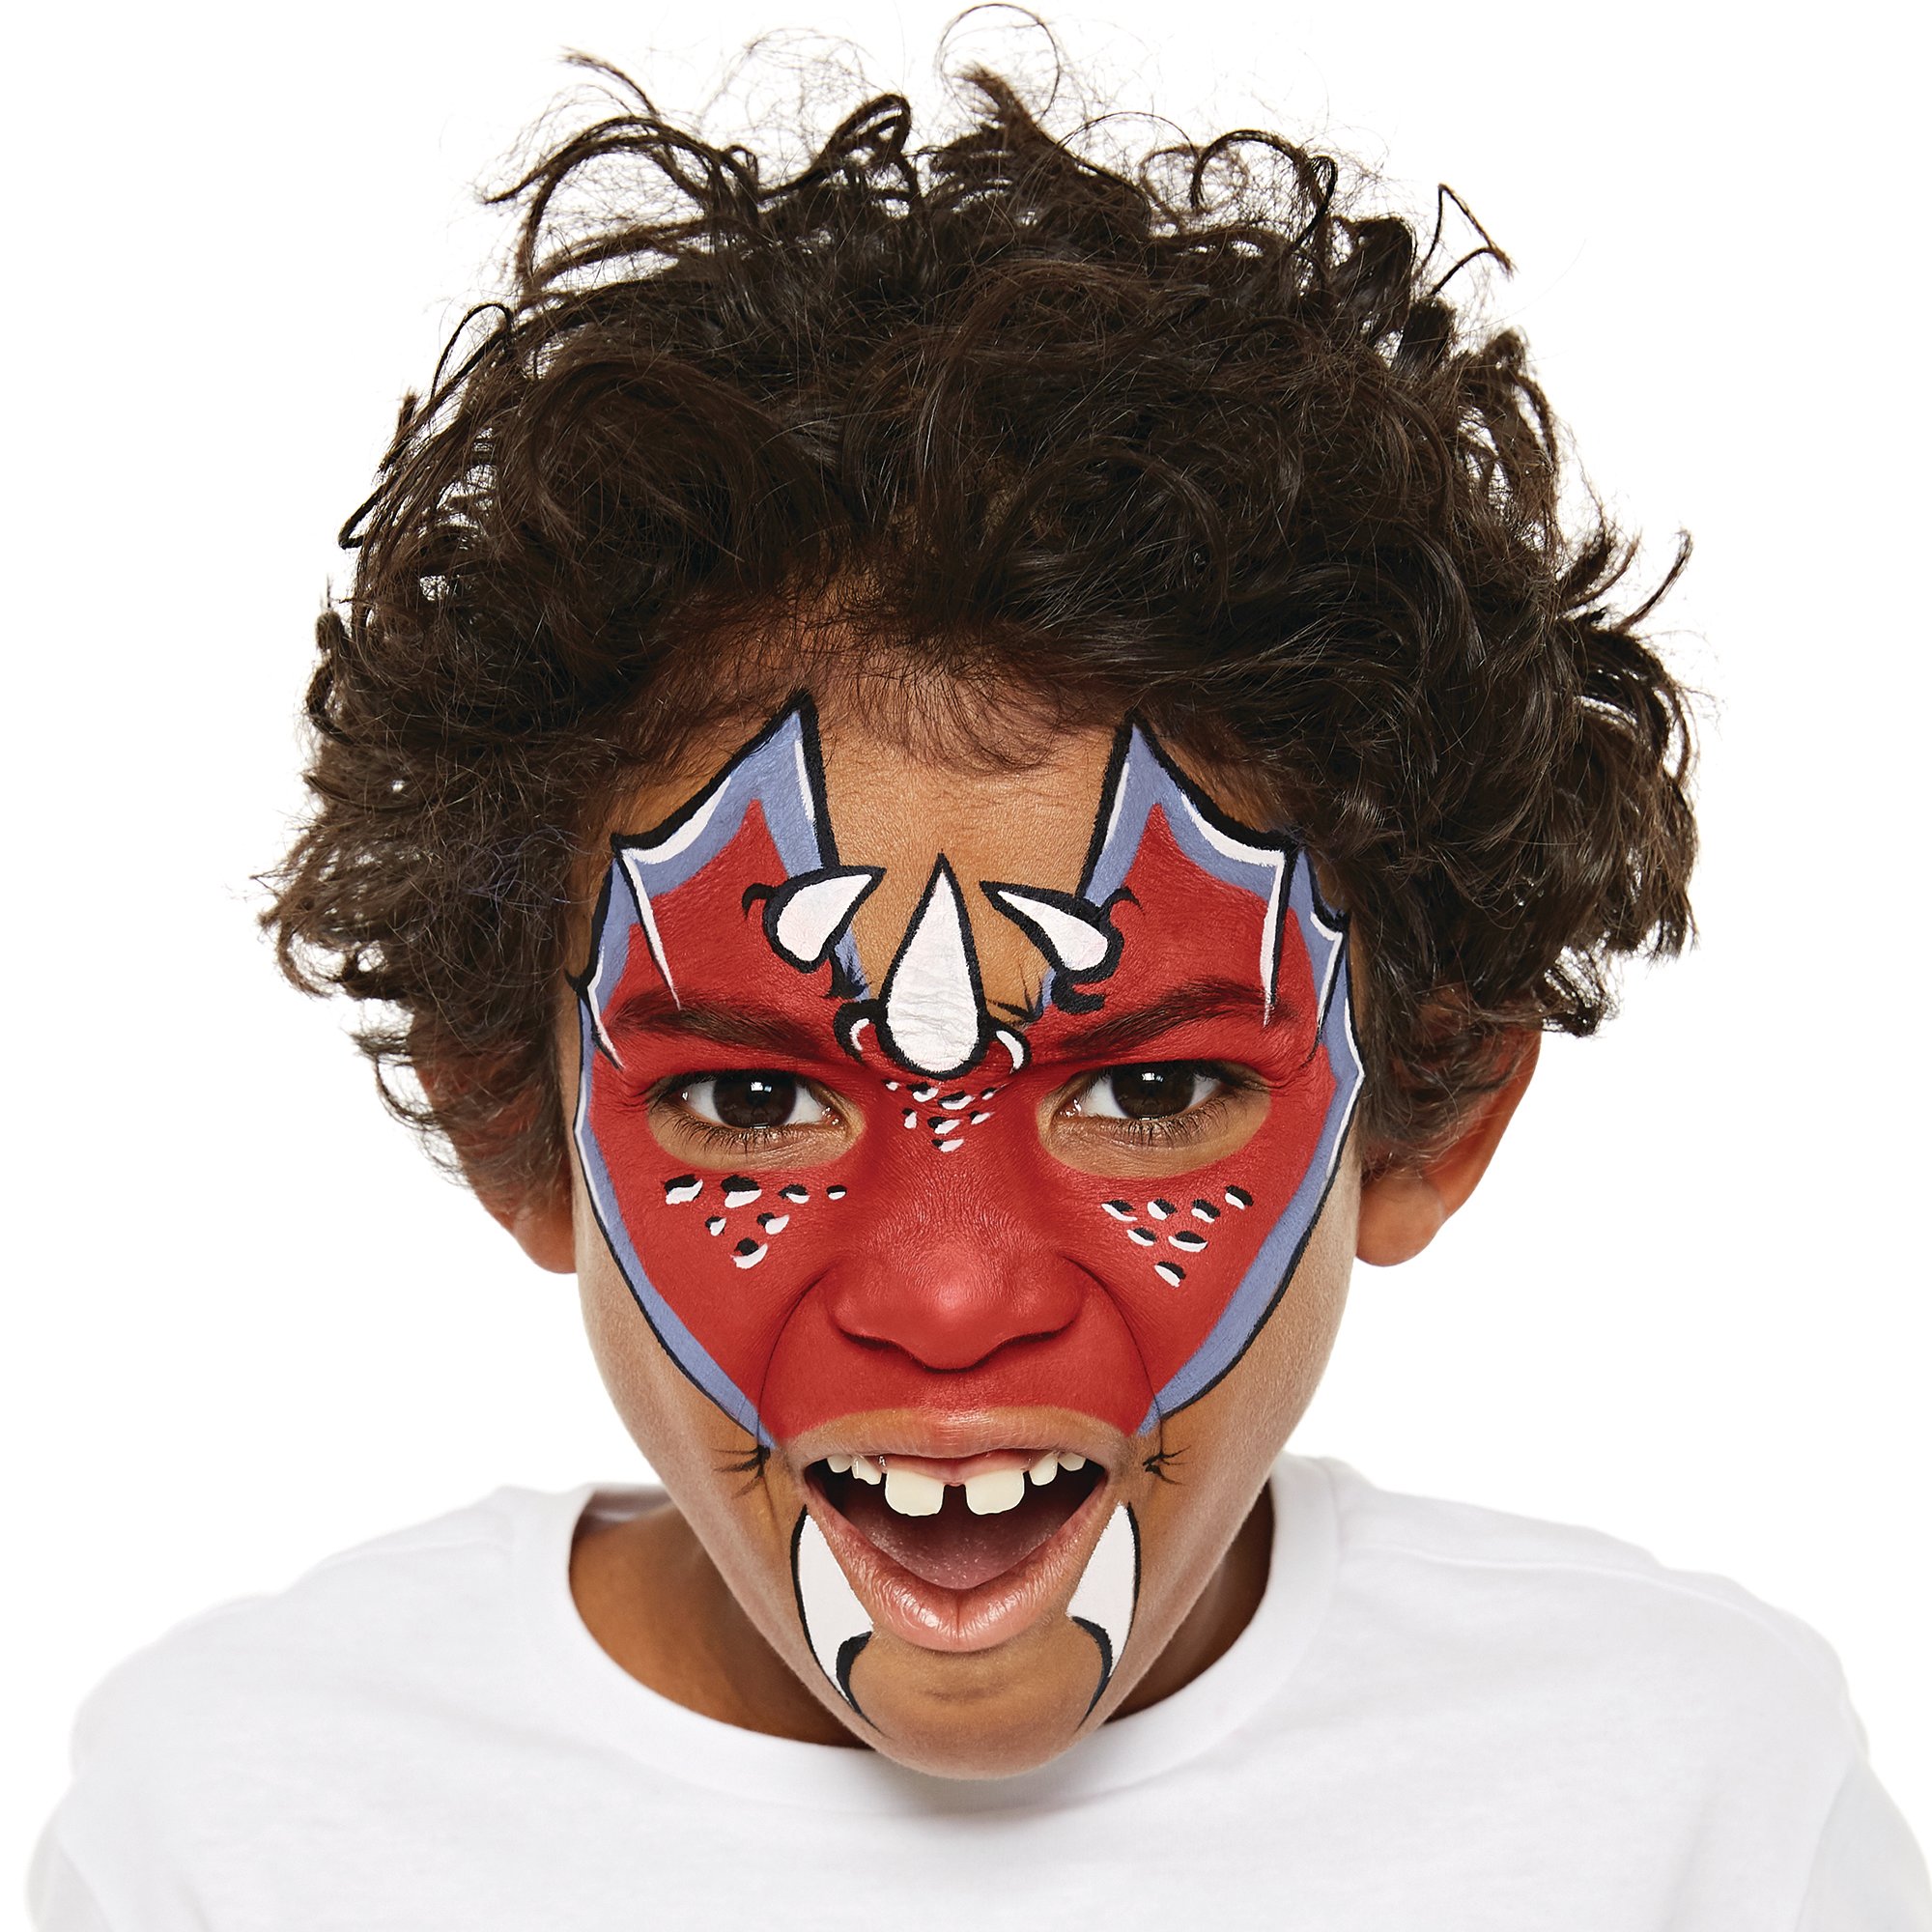 Dragon Face Paint Guide - Follow our 3 Step Dragon Guide | Snazaroo - UK